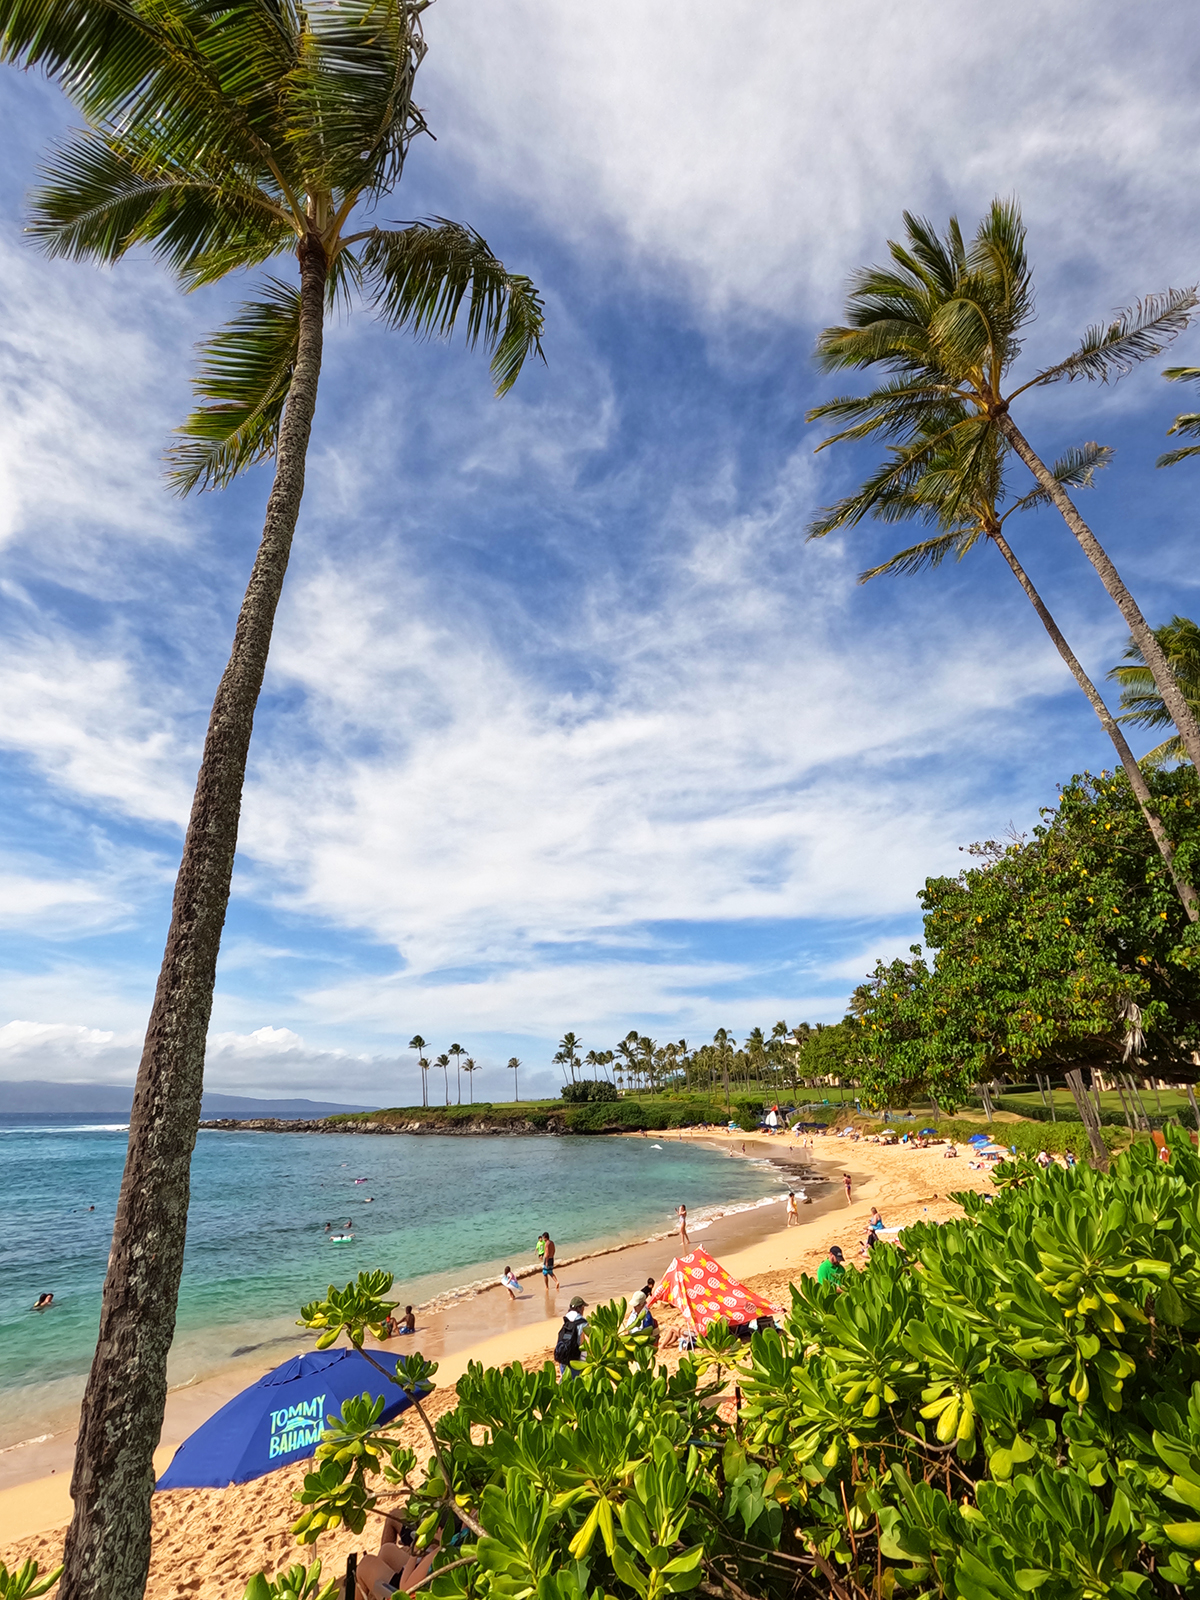 beach in maui with palm trees beach umbrellas and greenery surrounding with blue water